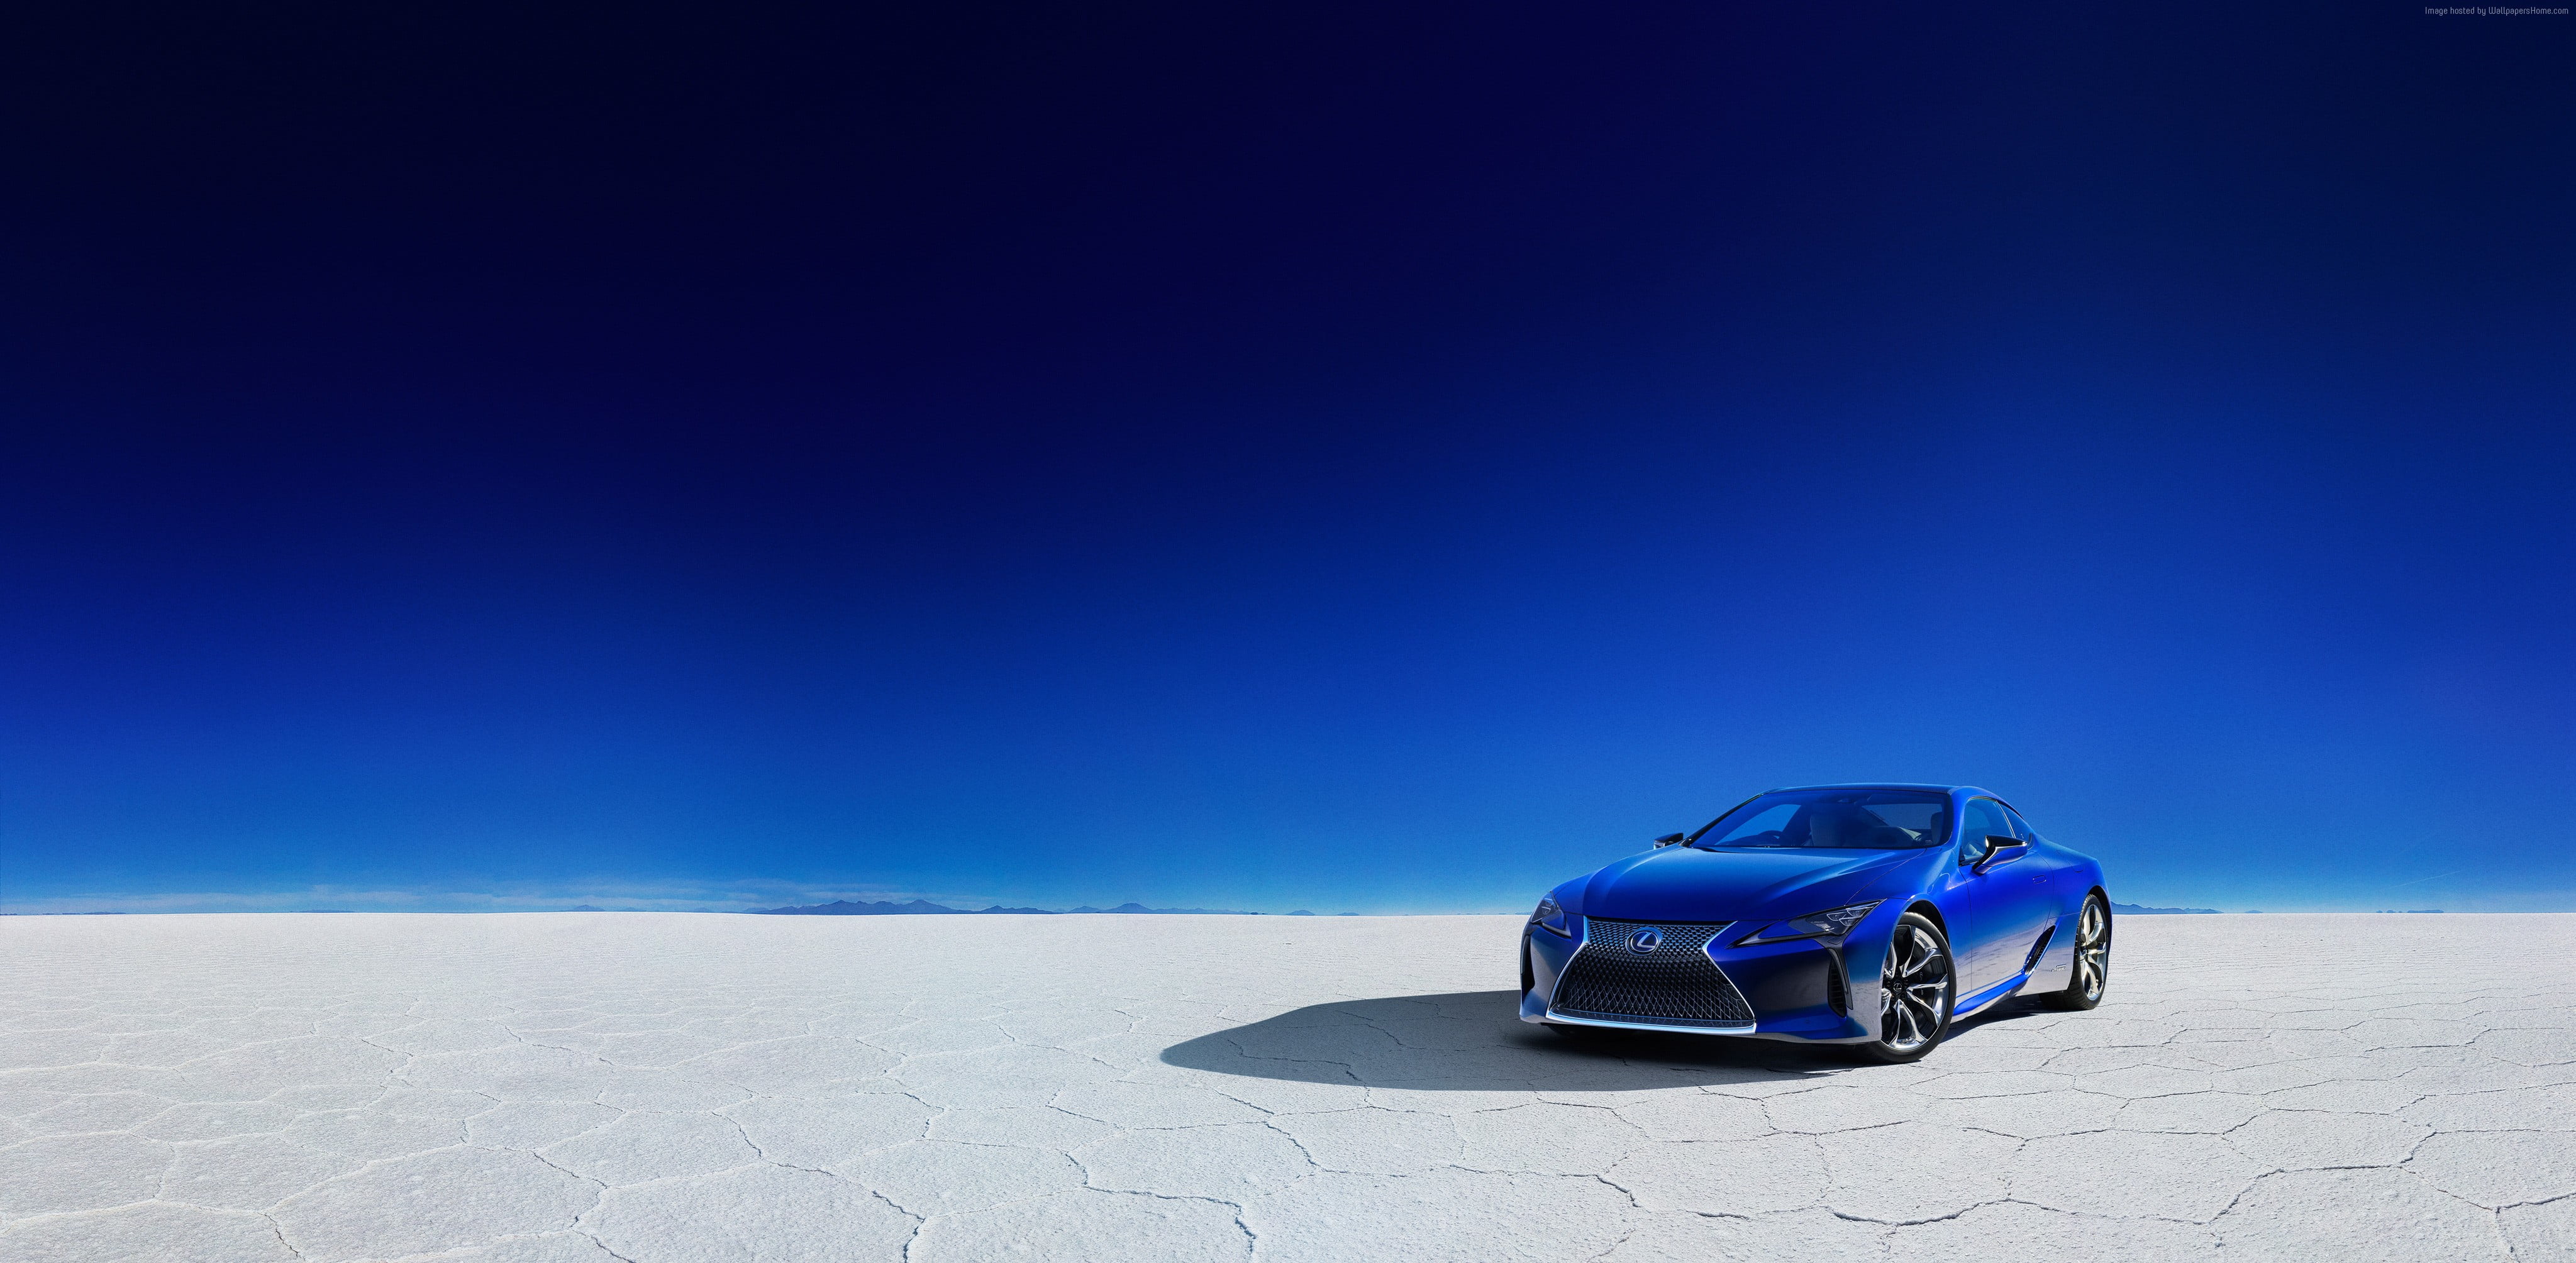 Lexus Lc 500 Hd Wallpapers Tag Wallpaper Flare